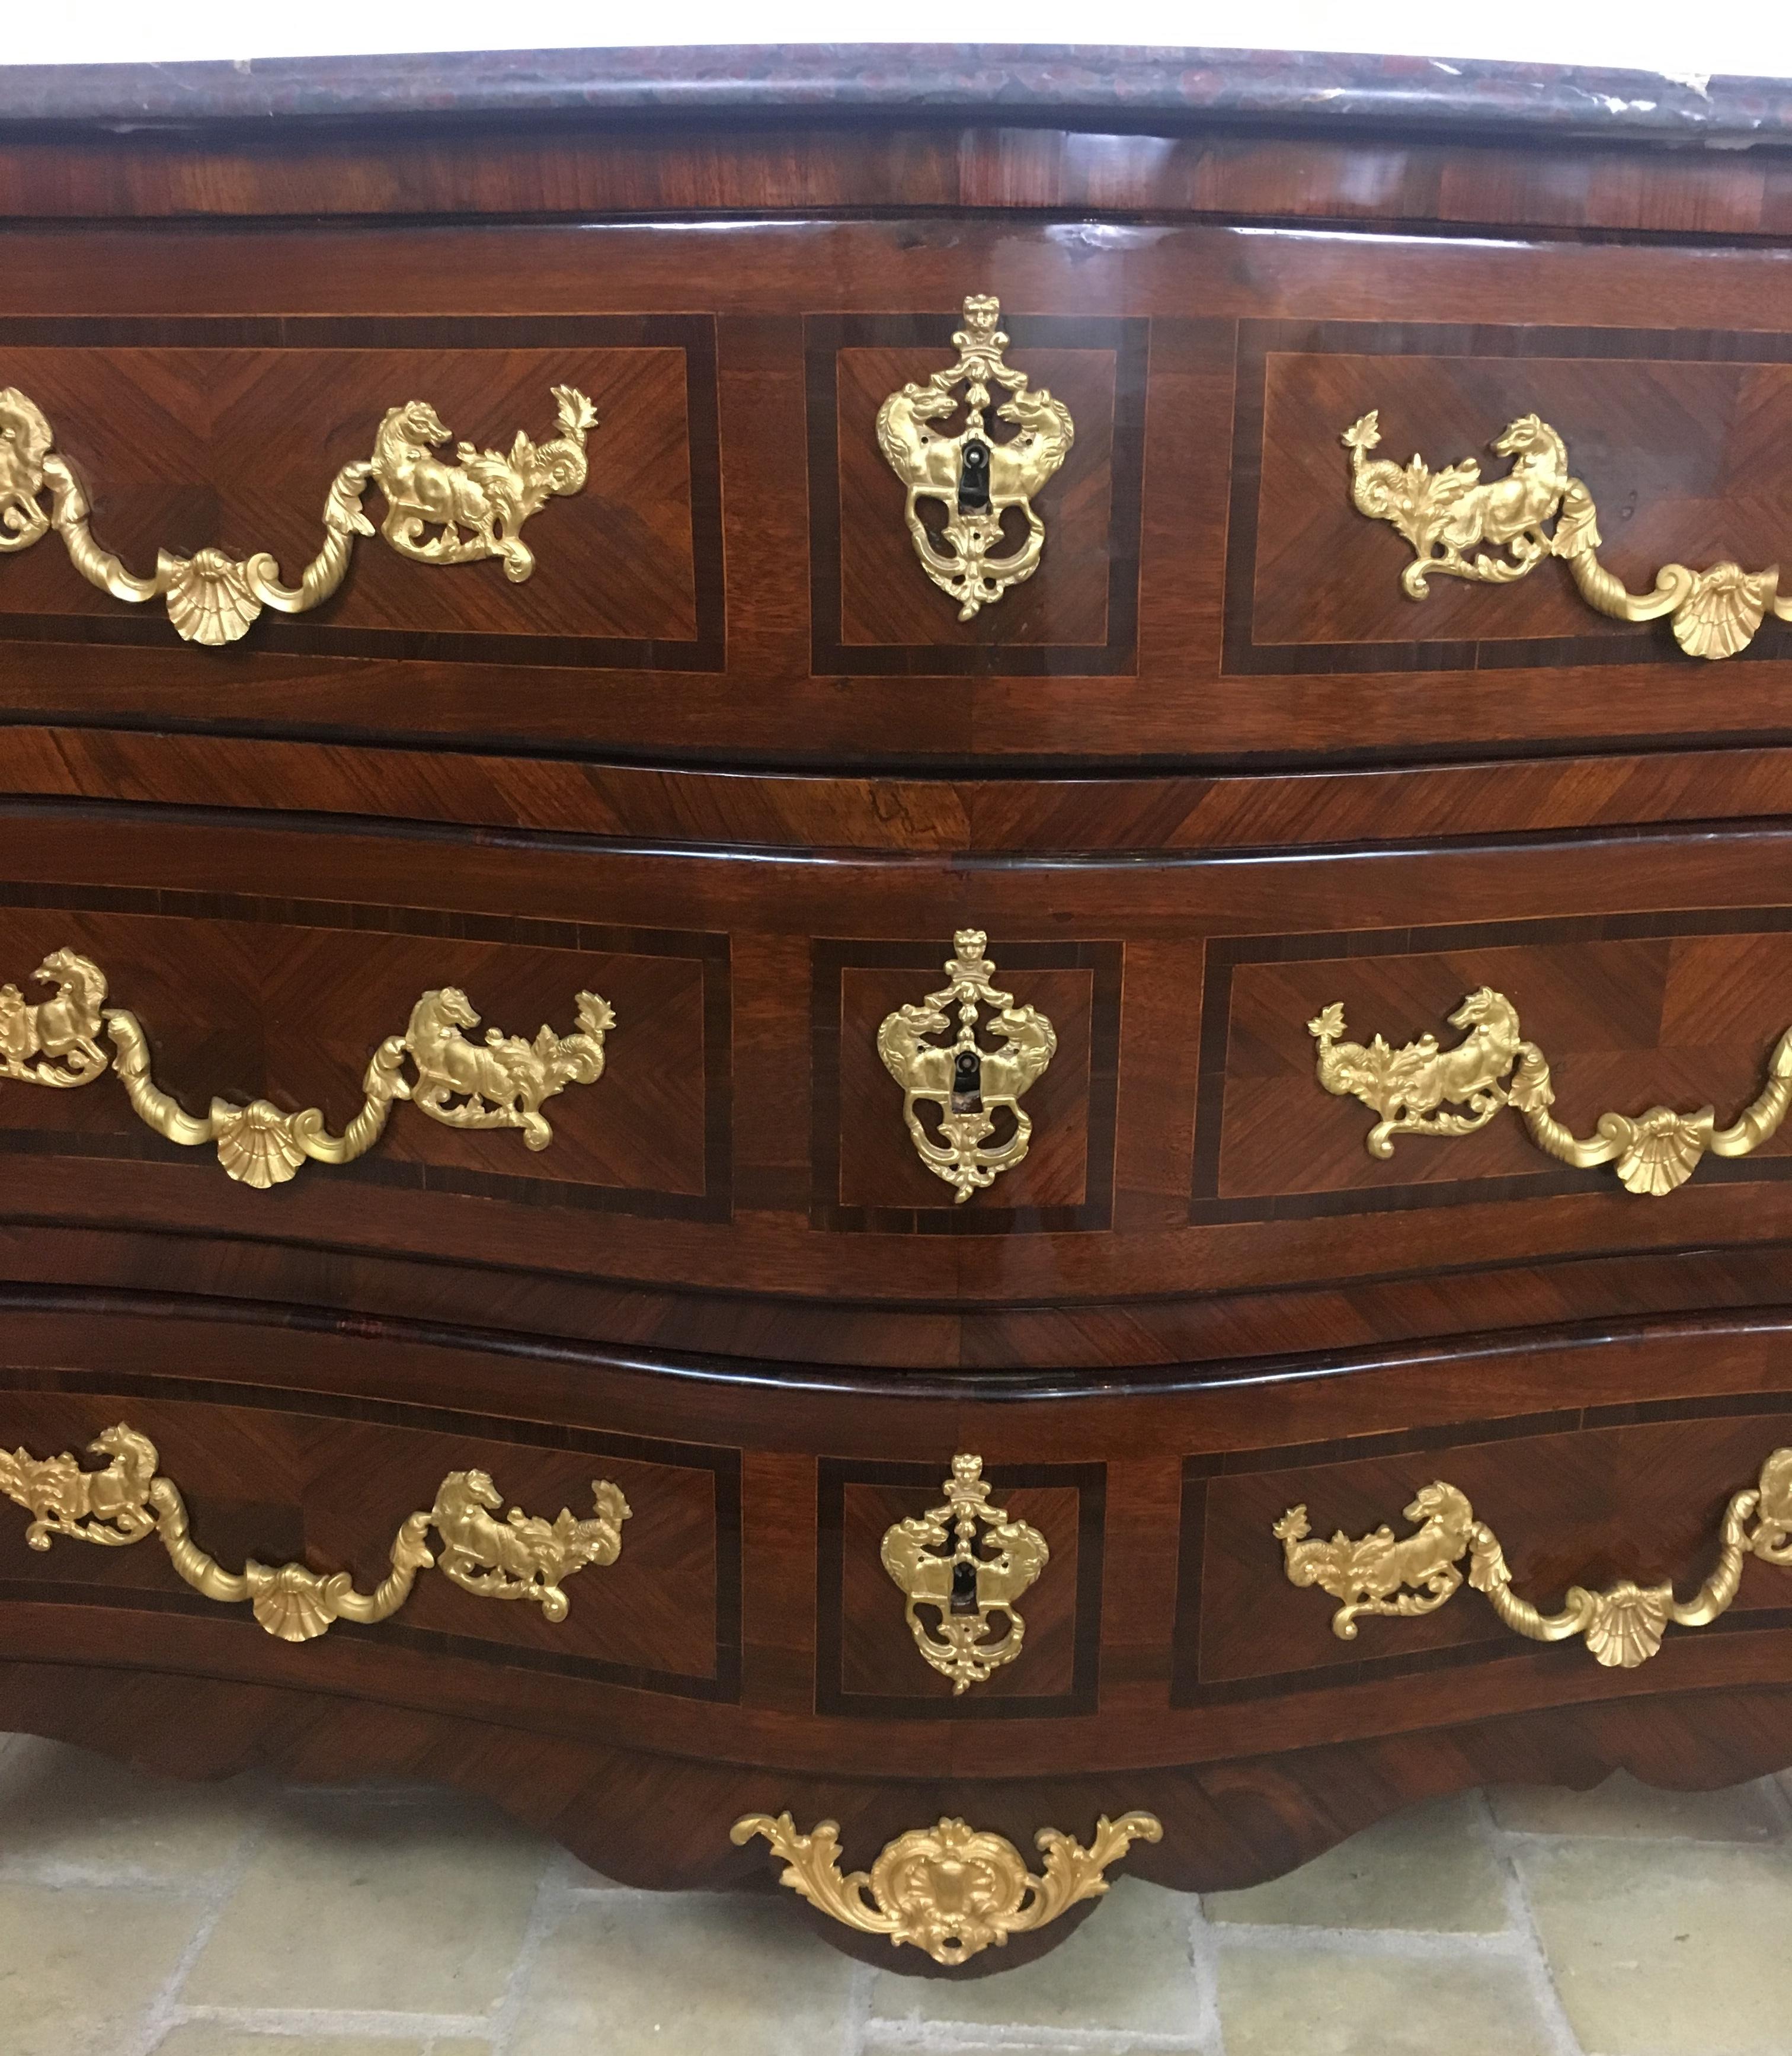 A very fine Early 18th century French Louis XV Commode 